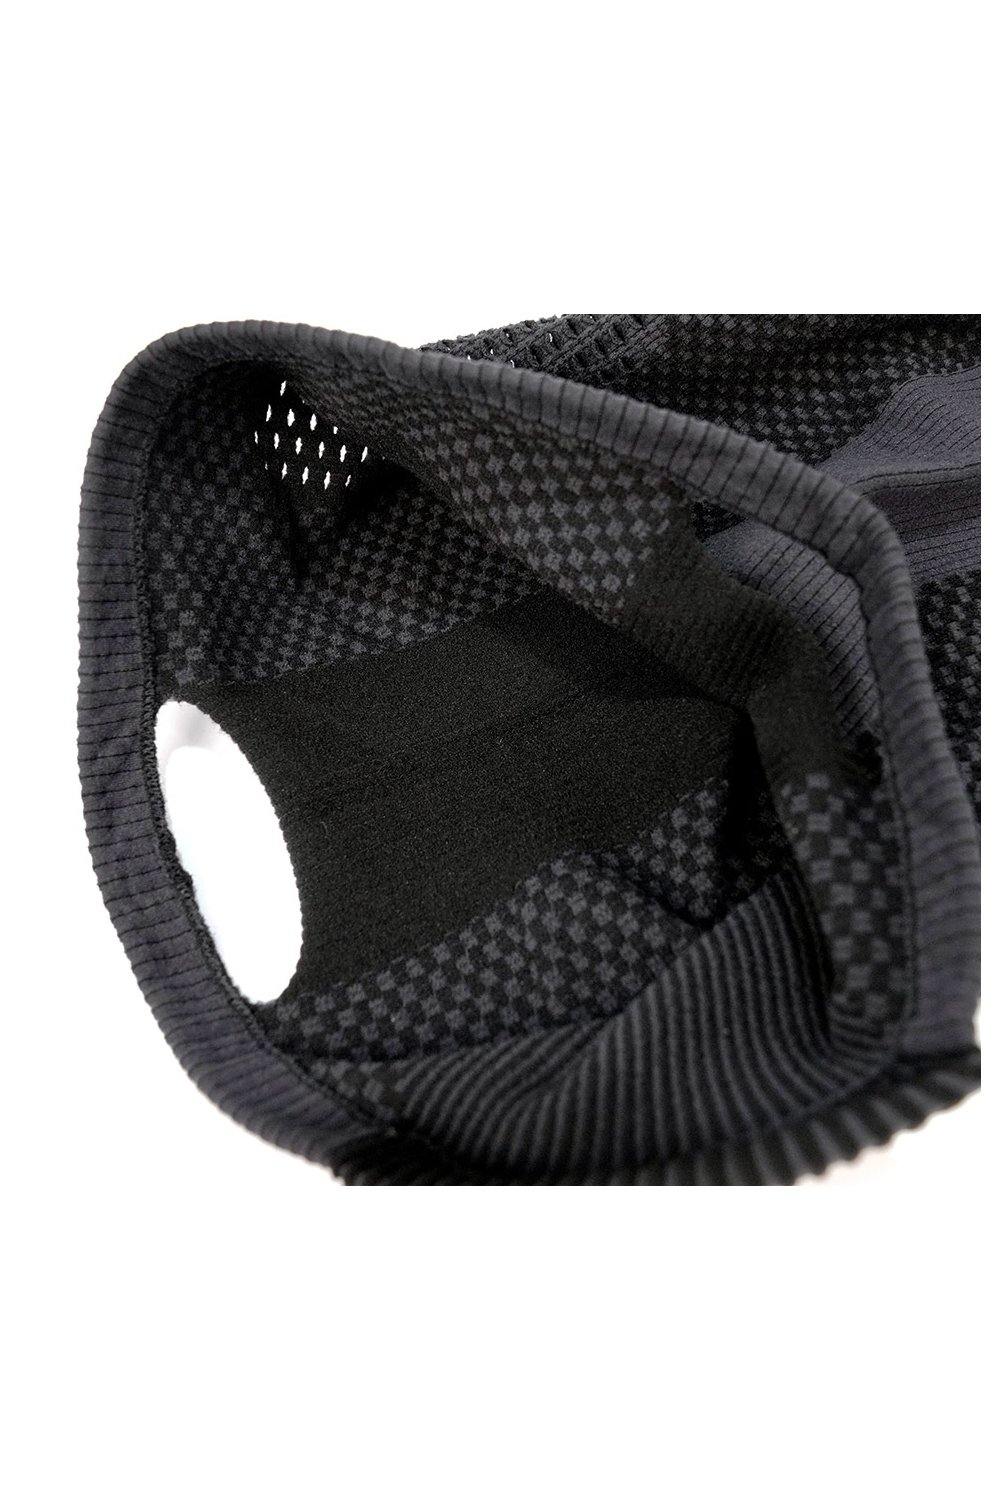 Sundried Cycle Scarf Mask SD0315 Black Activewear